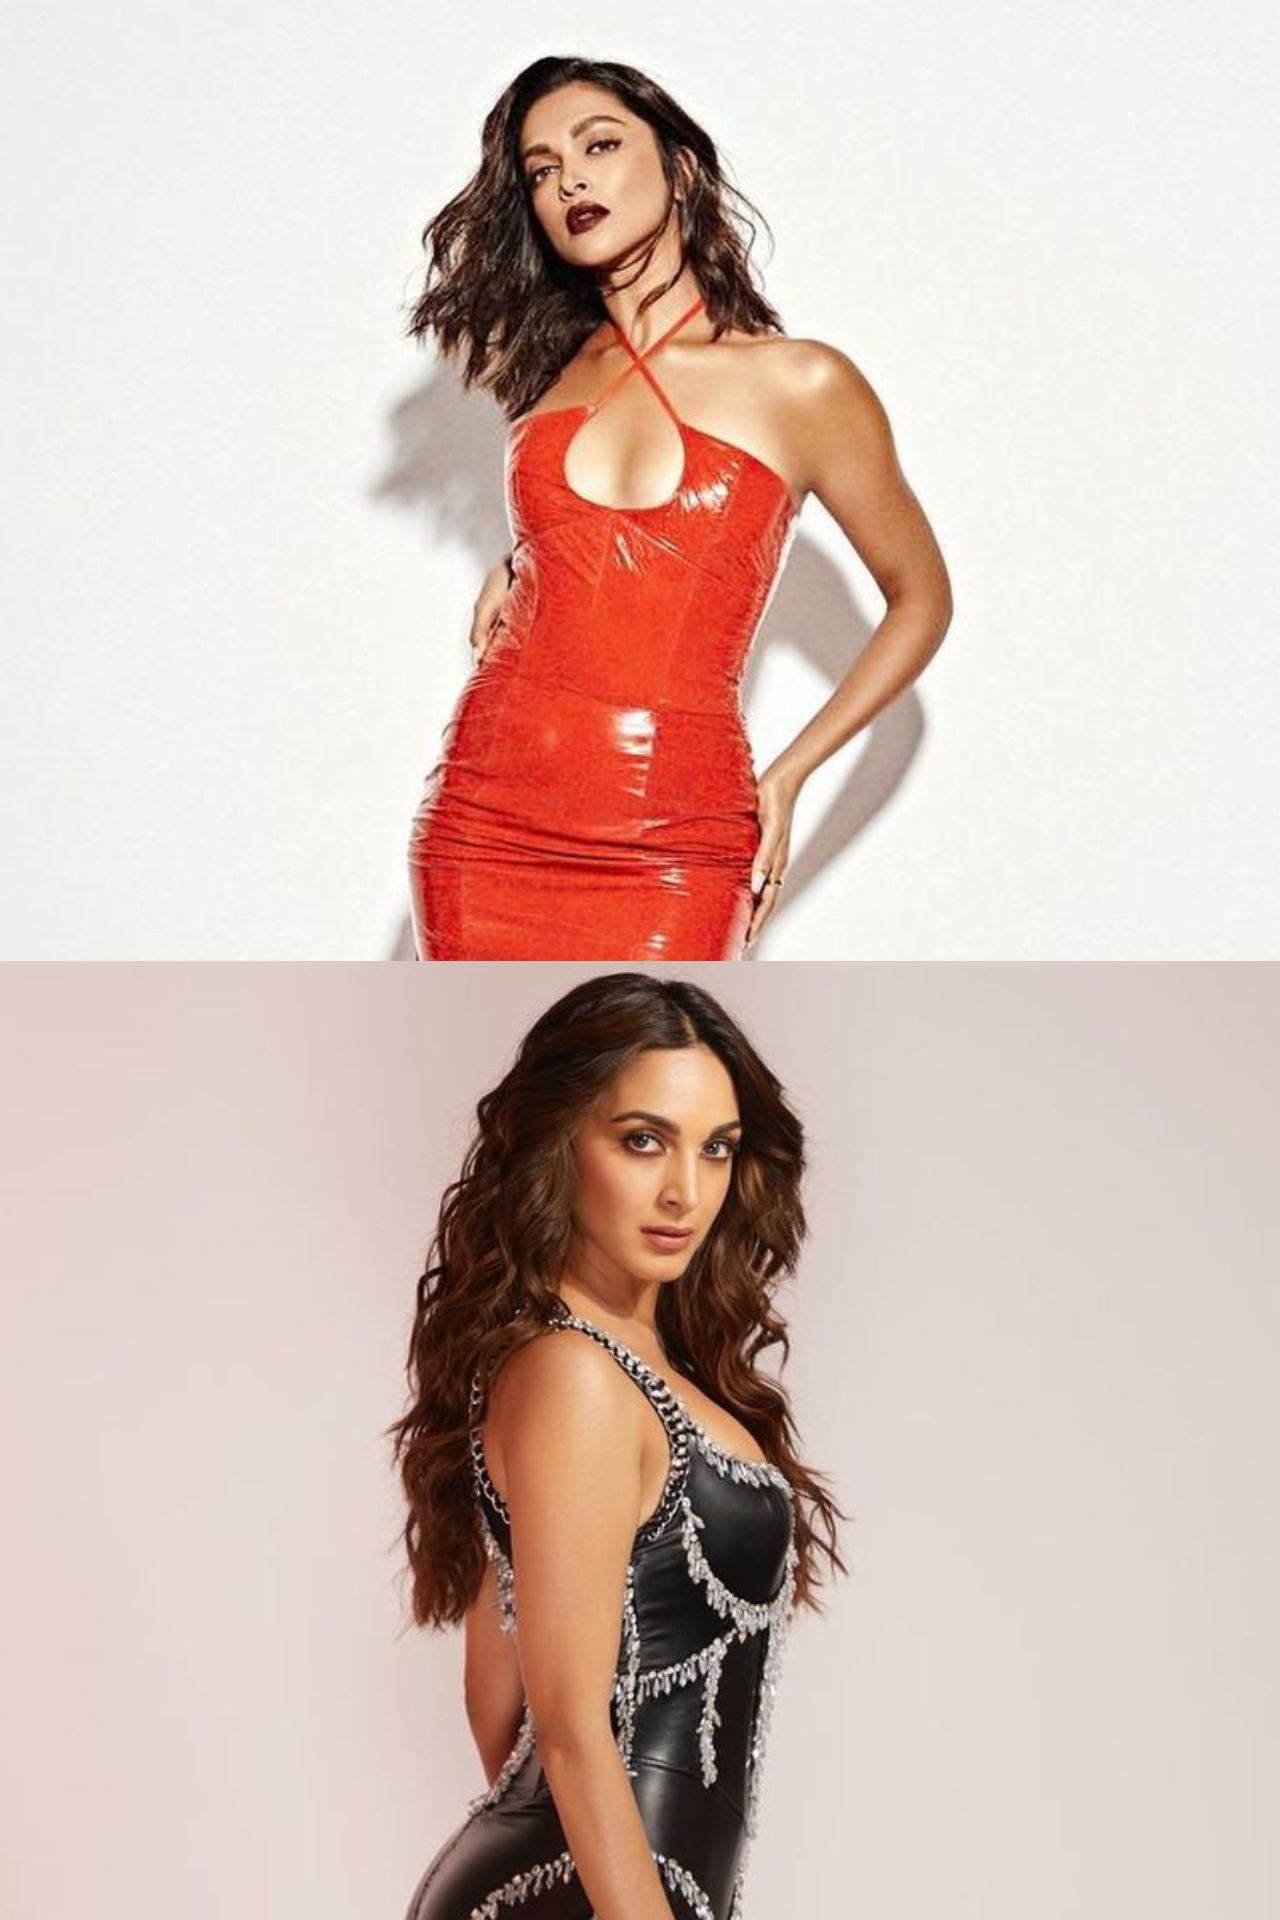 Bollywood actresses ruling the style game in sultry latex dresses 